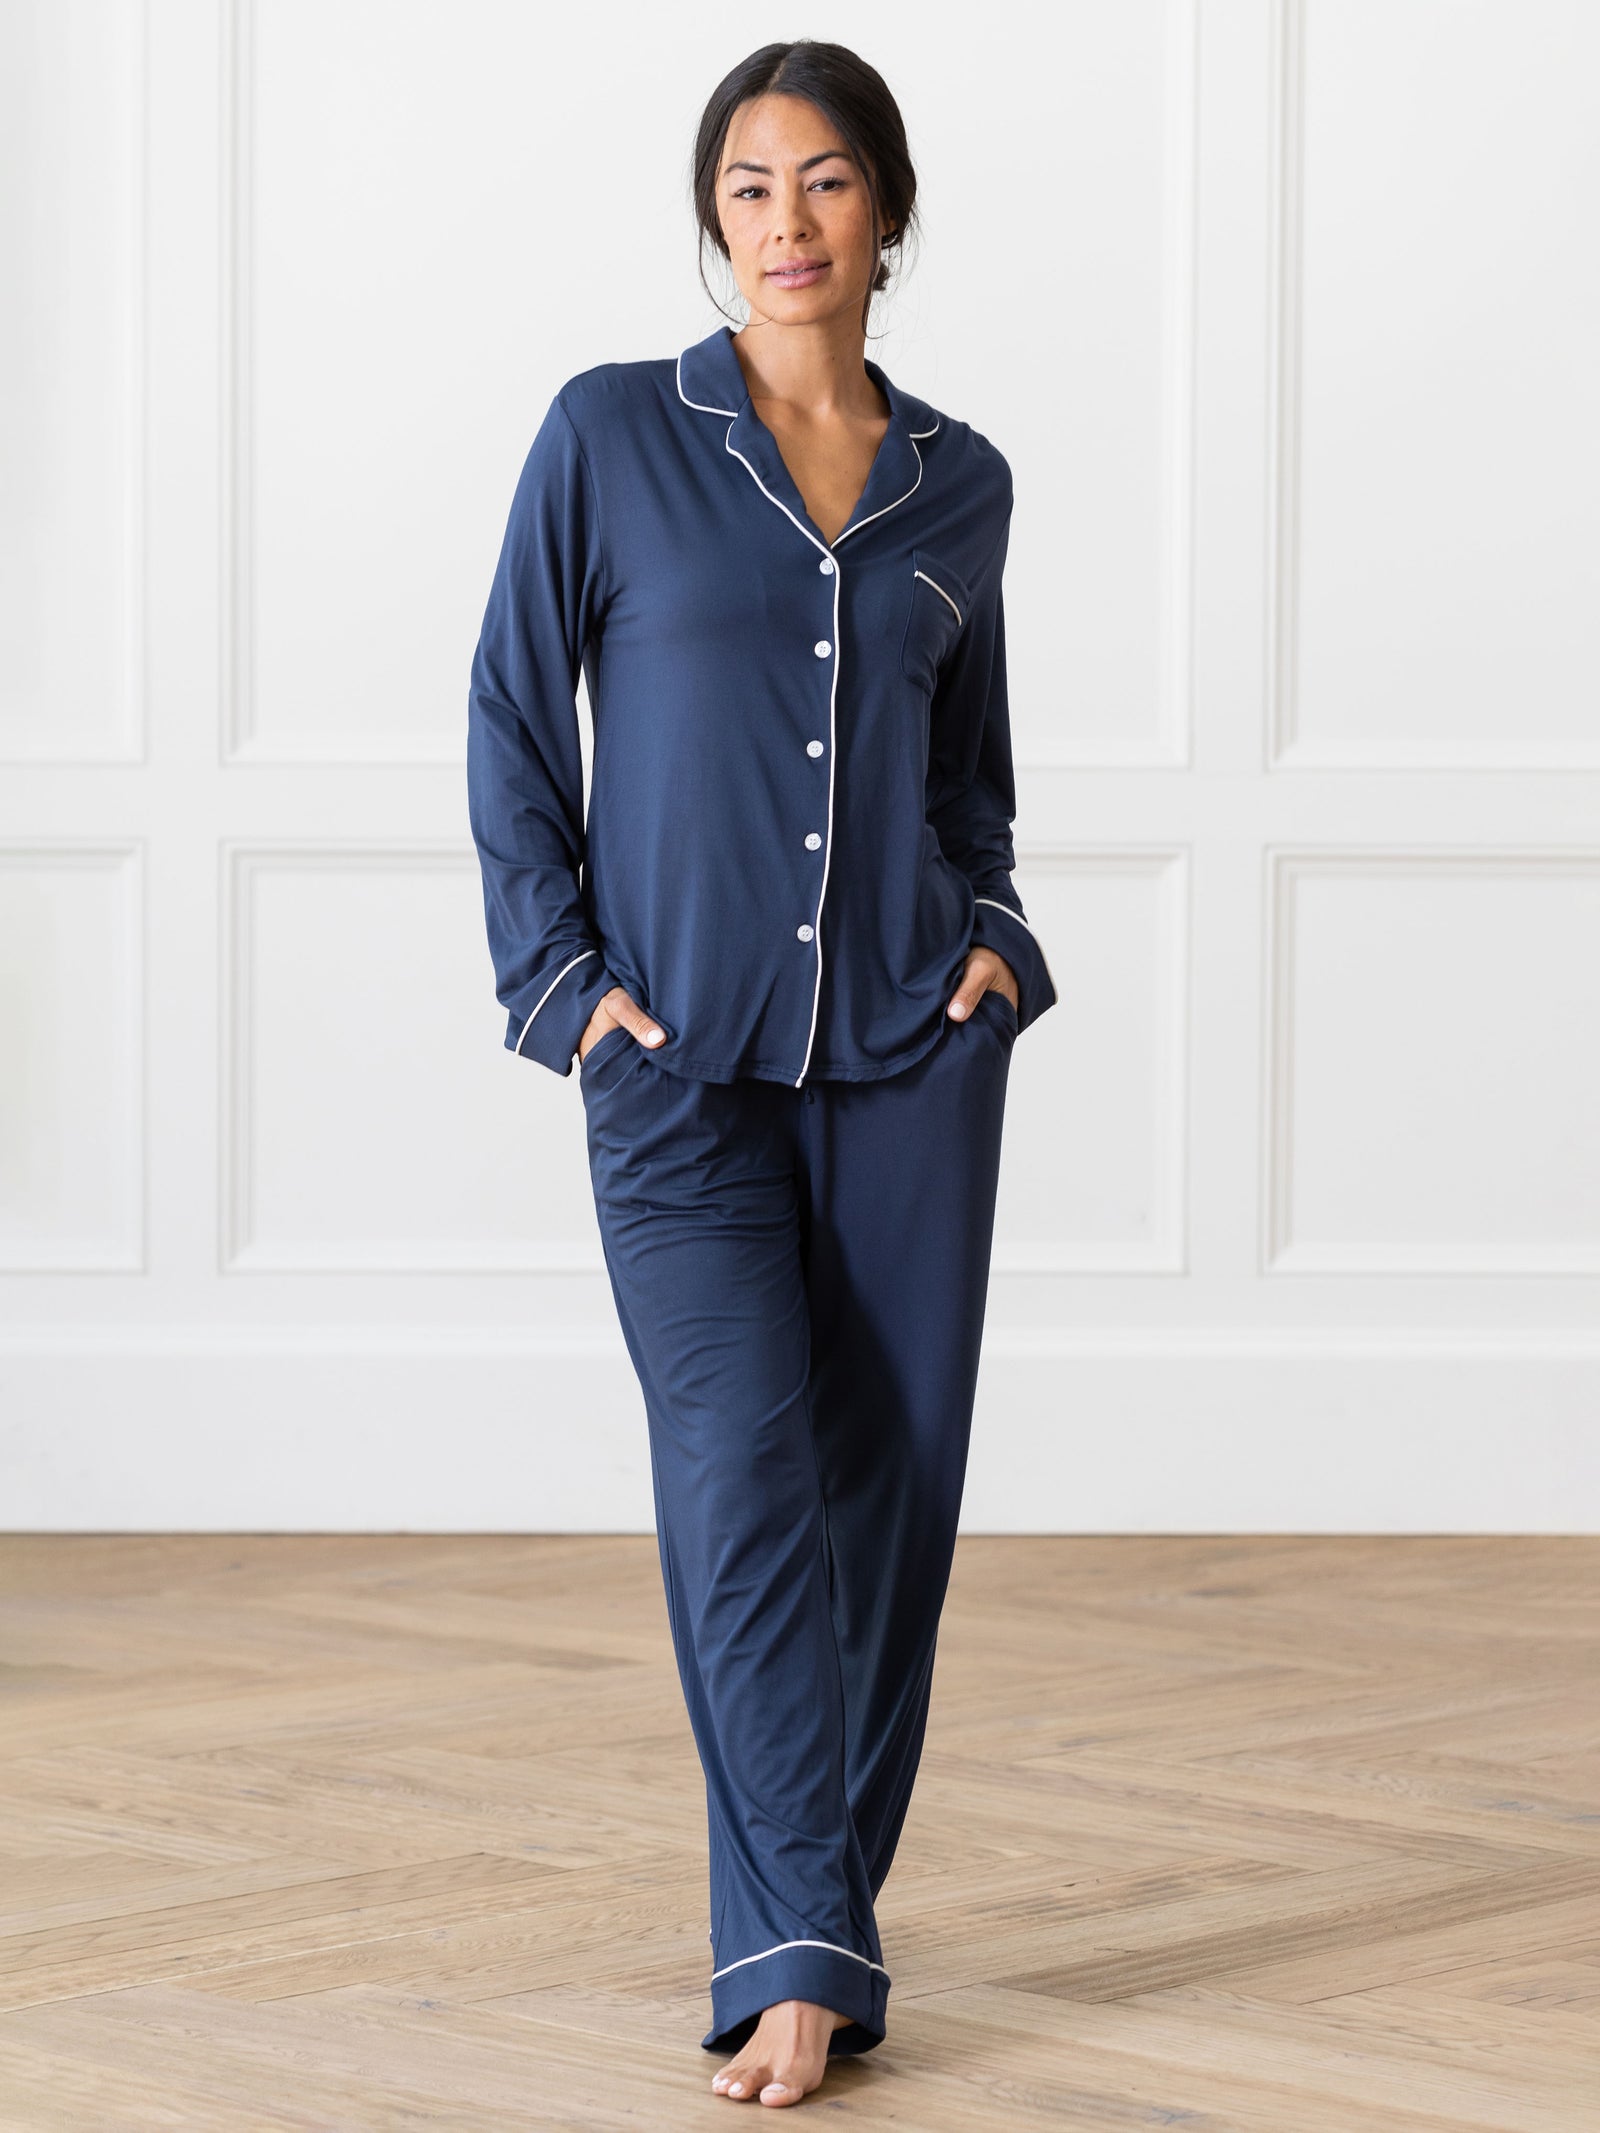 The Best Ethical Pyjamas To Keep You Cosy All Winter